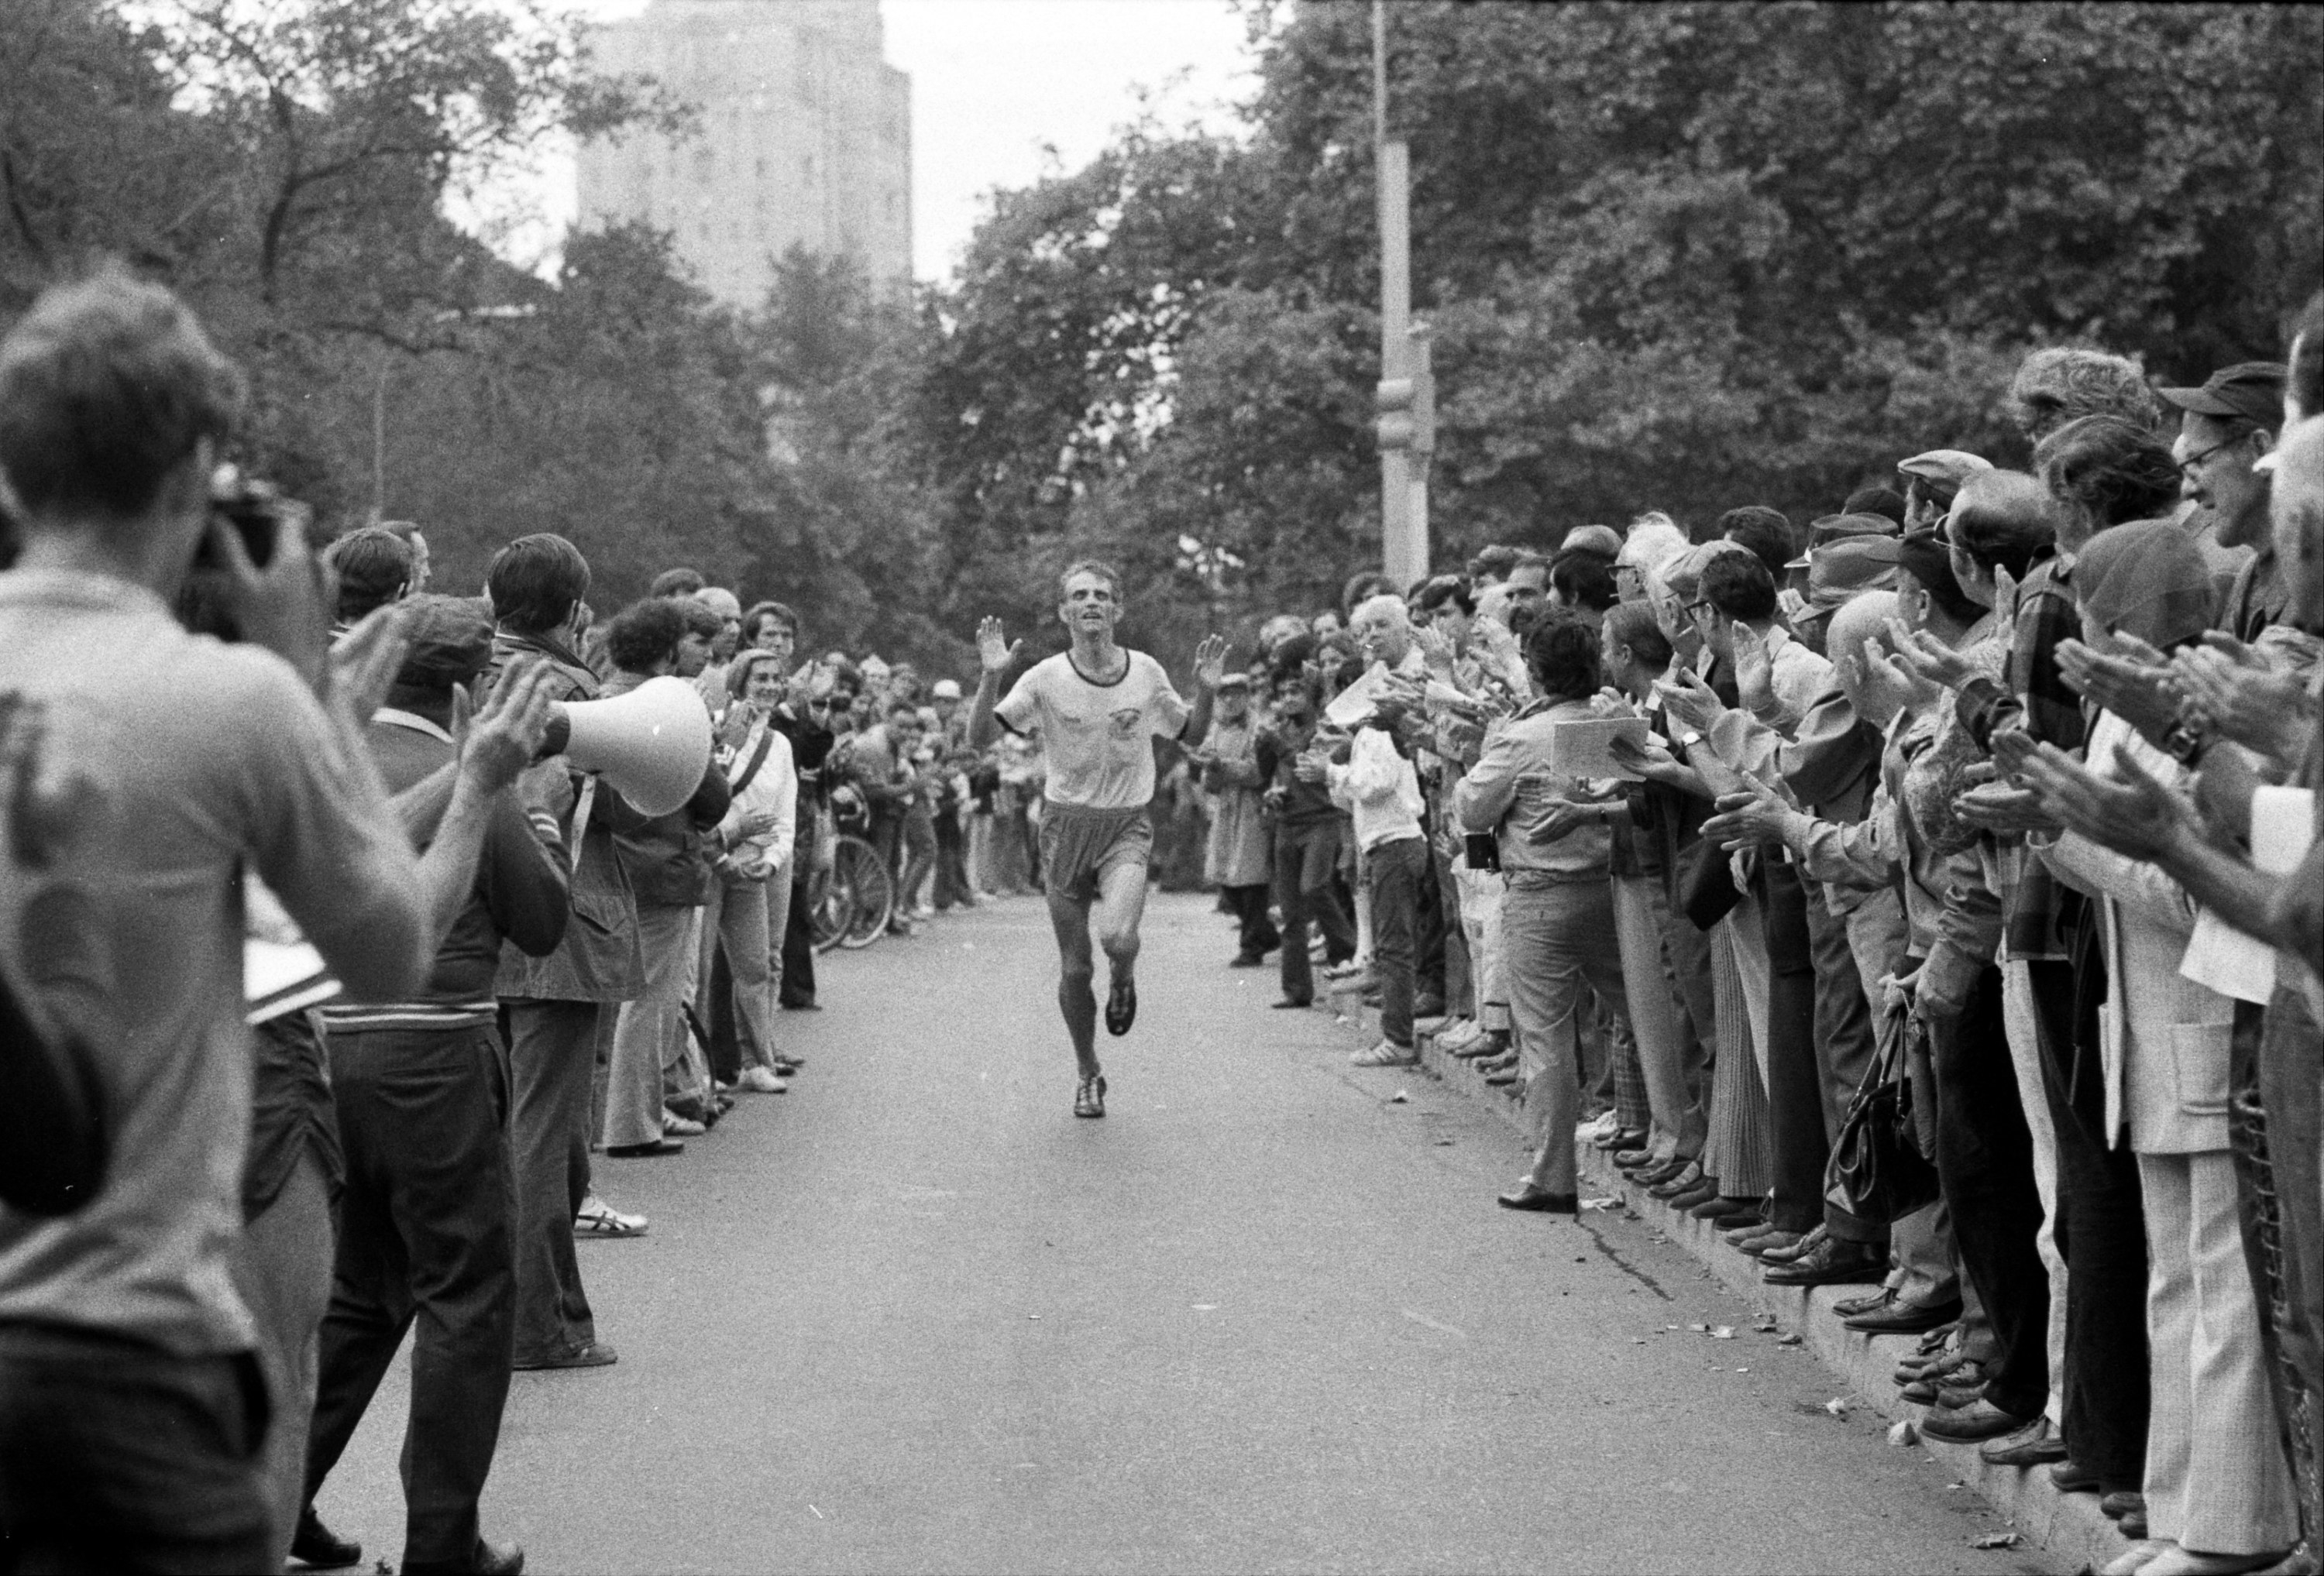 Black-and-white photo showing a man running toward the camera with crowds on either side